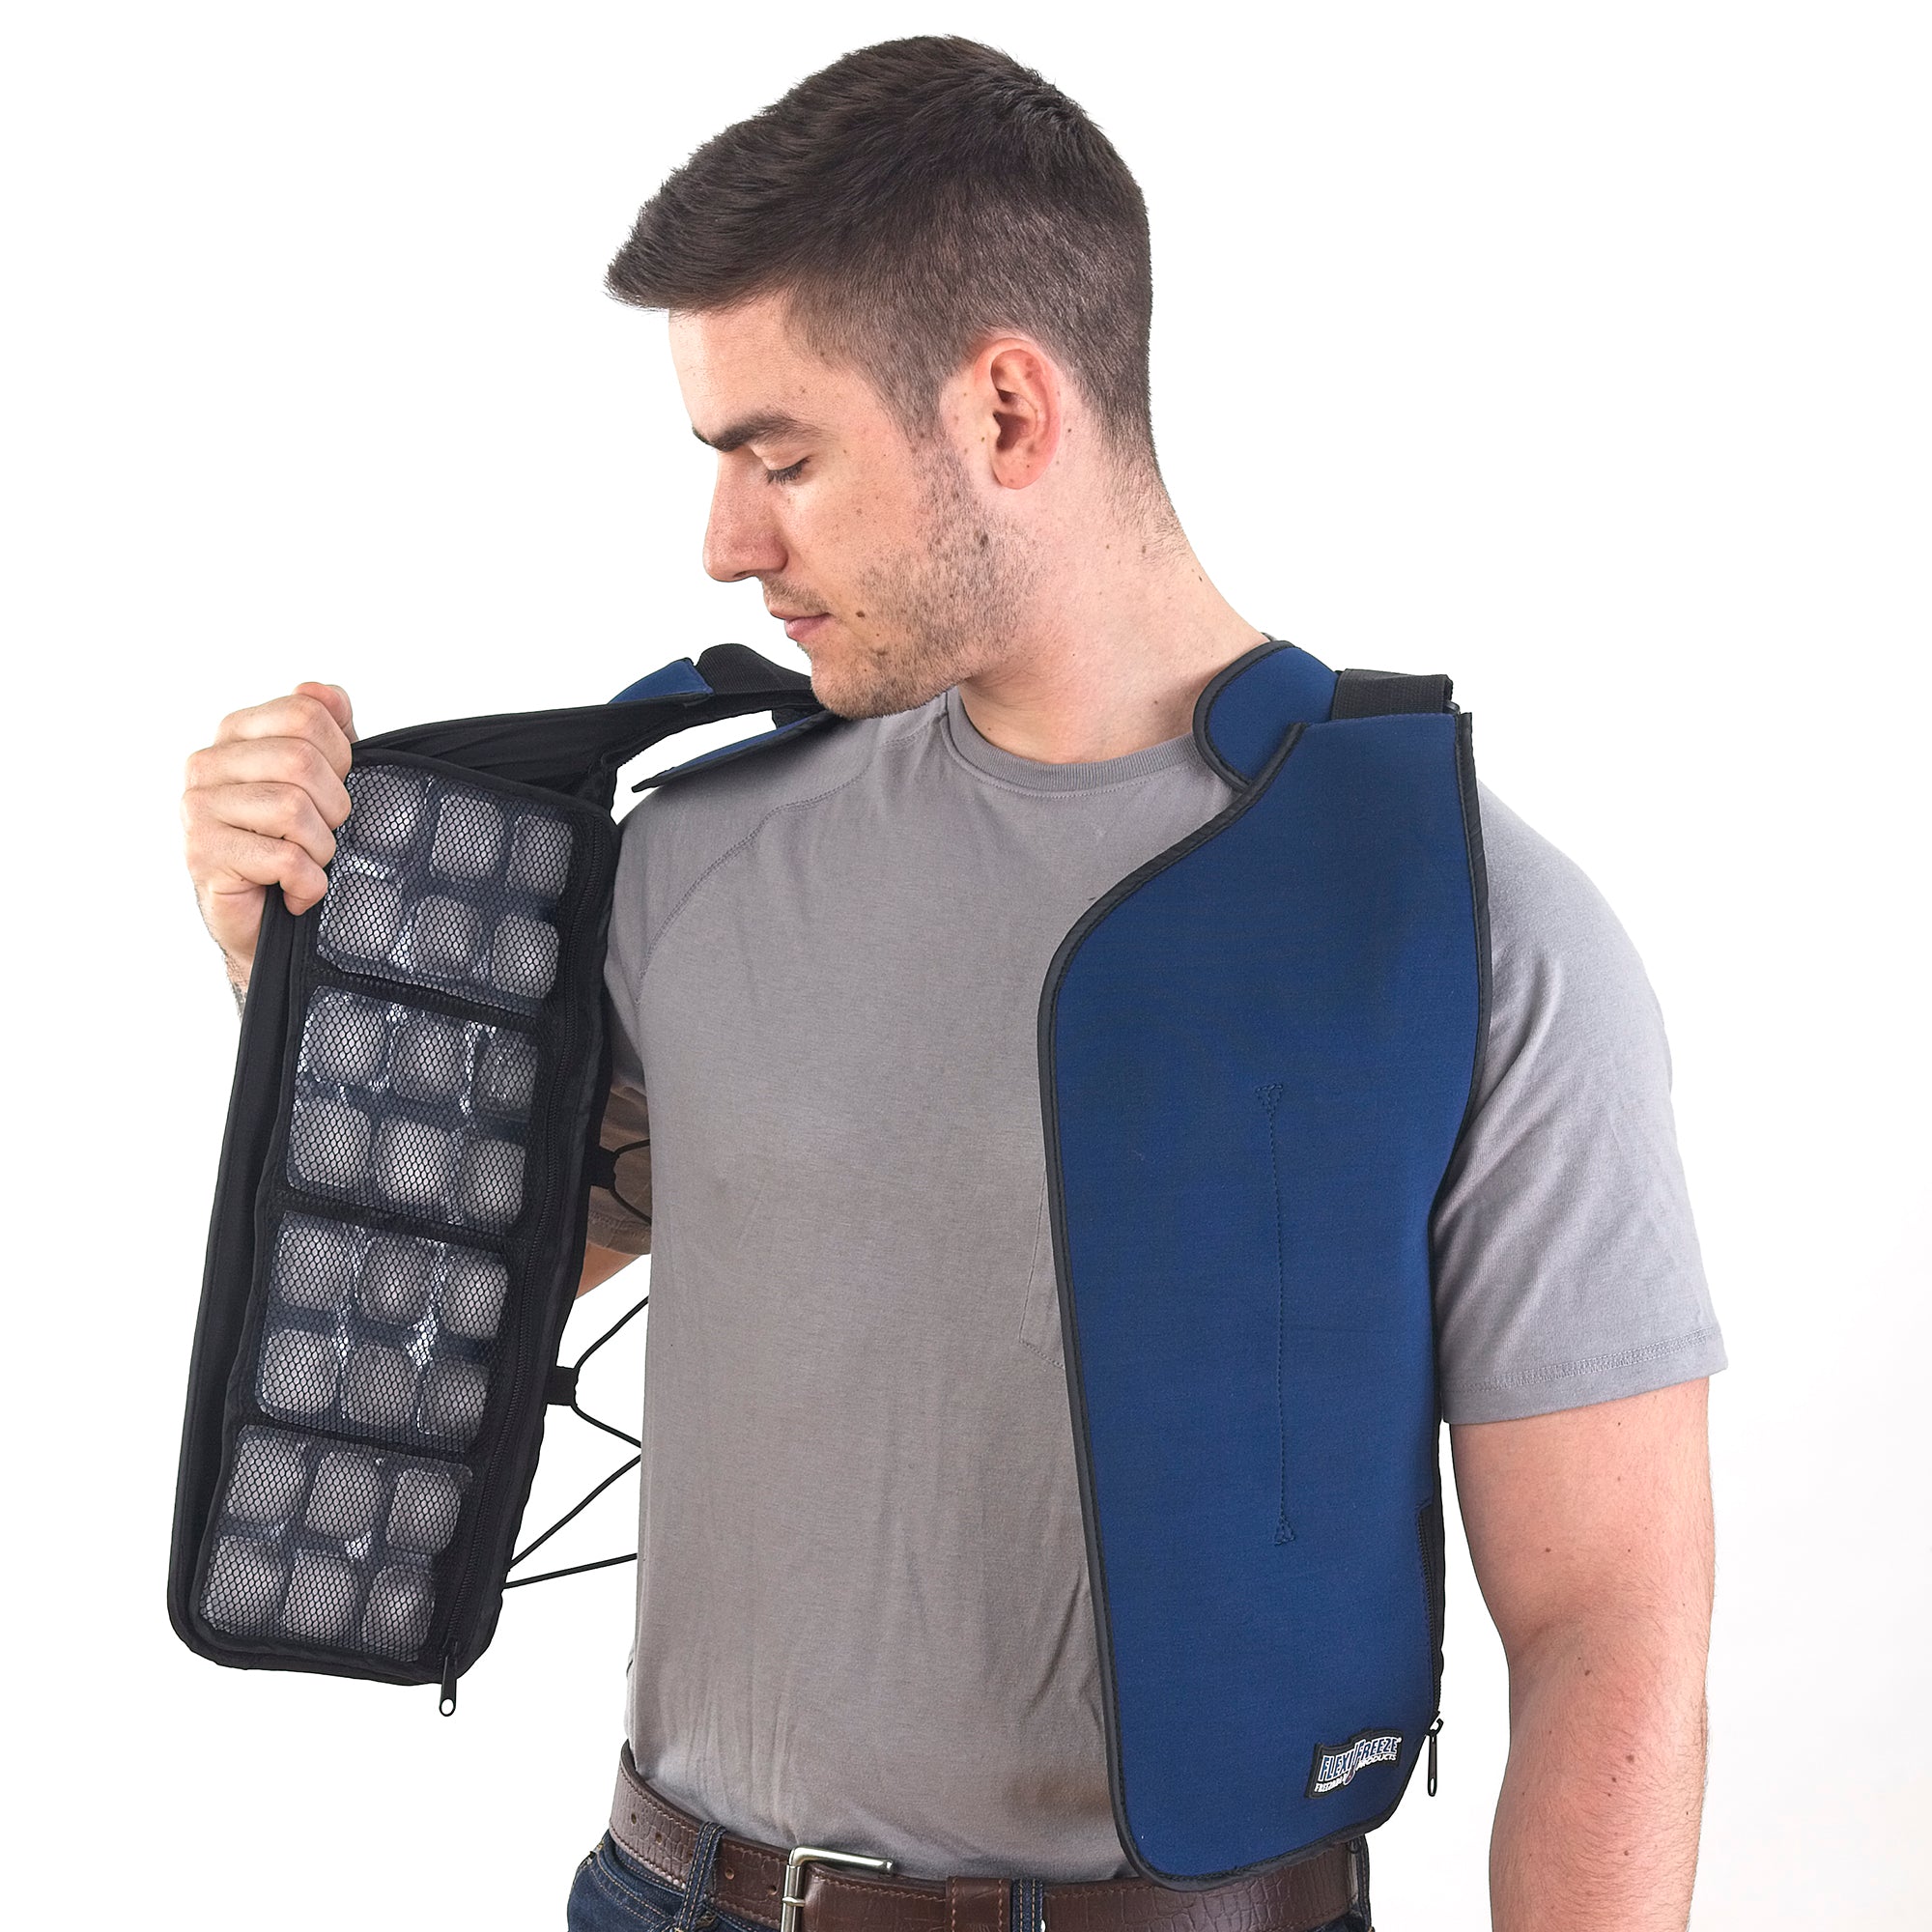 Man wearing FlexiFreeze personal velcro ice vest, blue, open, front view, ice panels visible